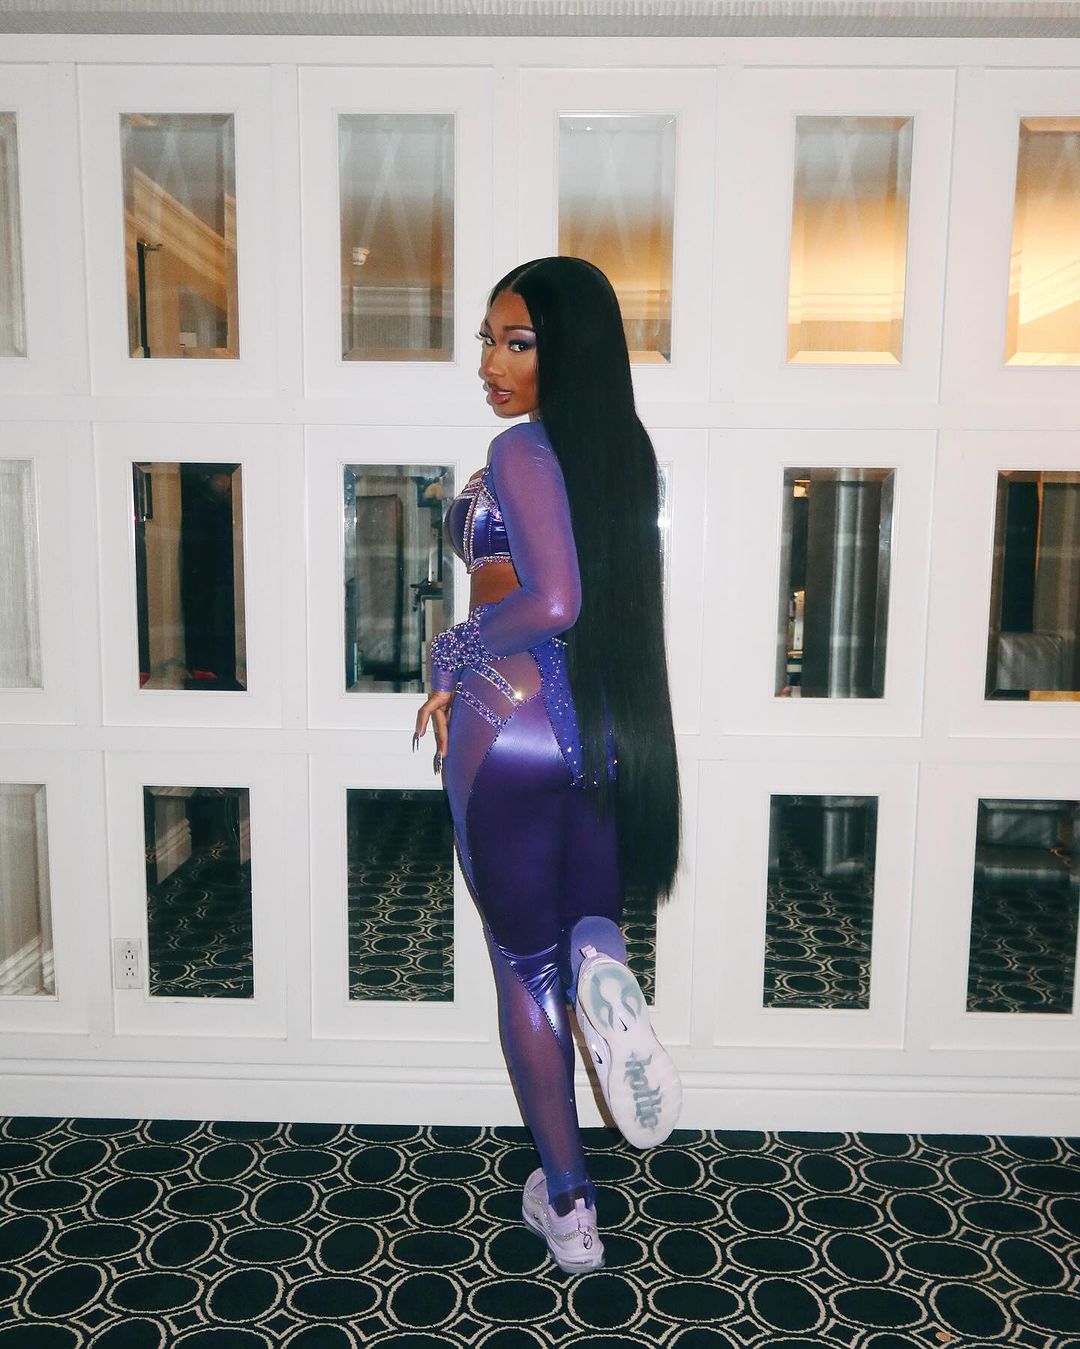 How To Buy Megan Thee Stallion's Nike Activewear Line